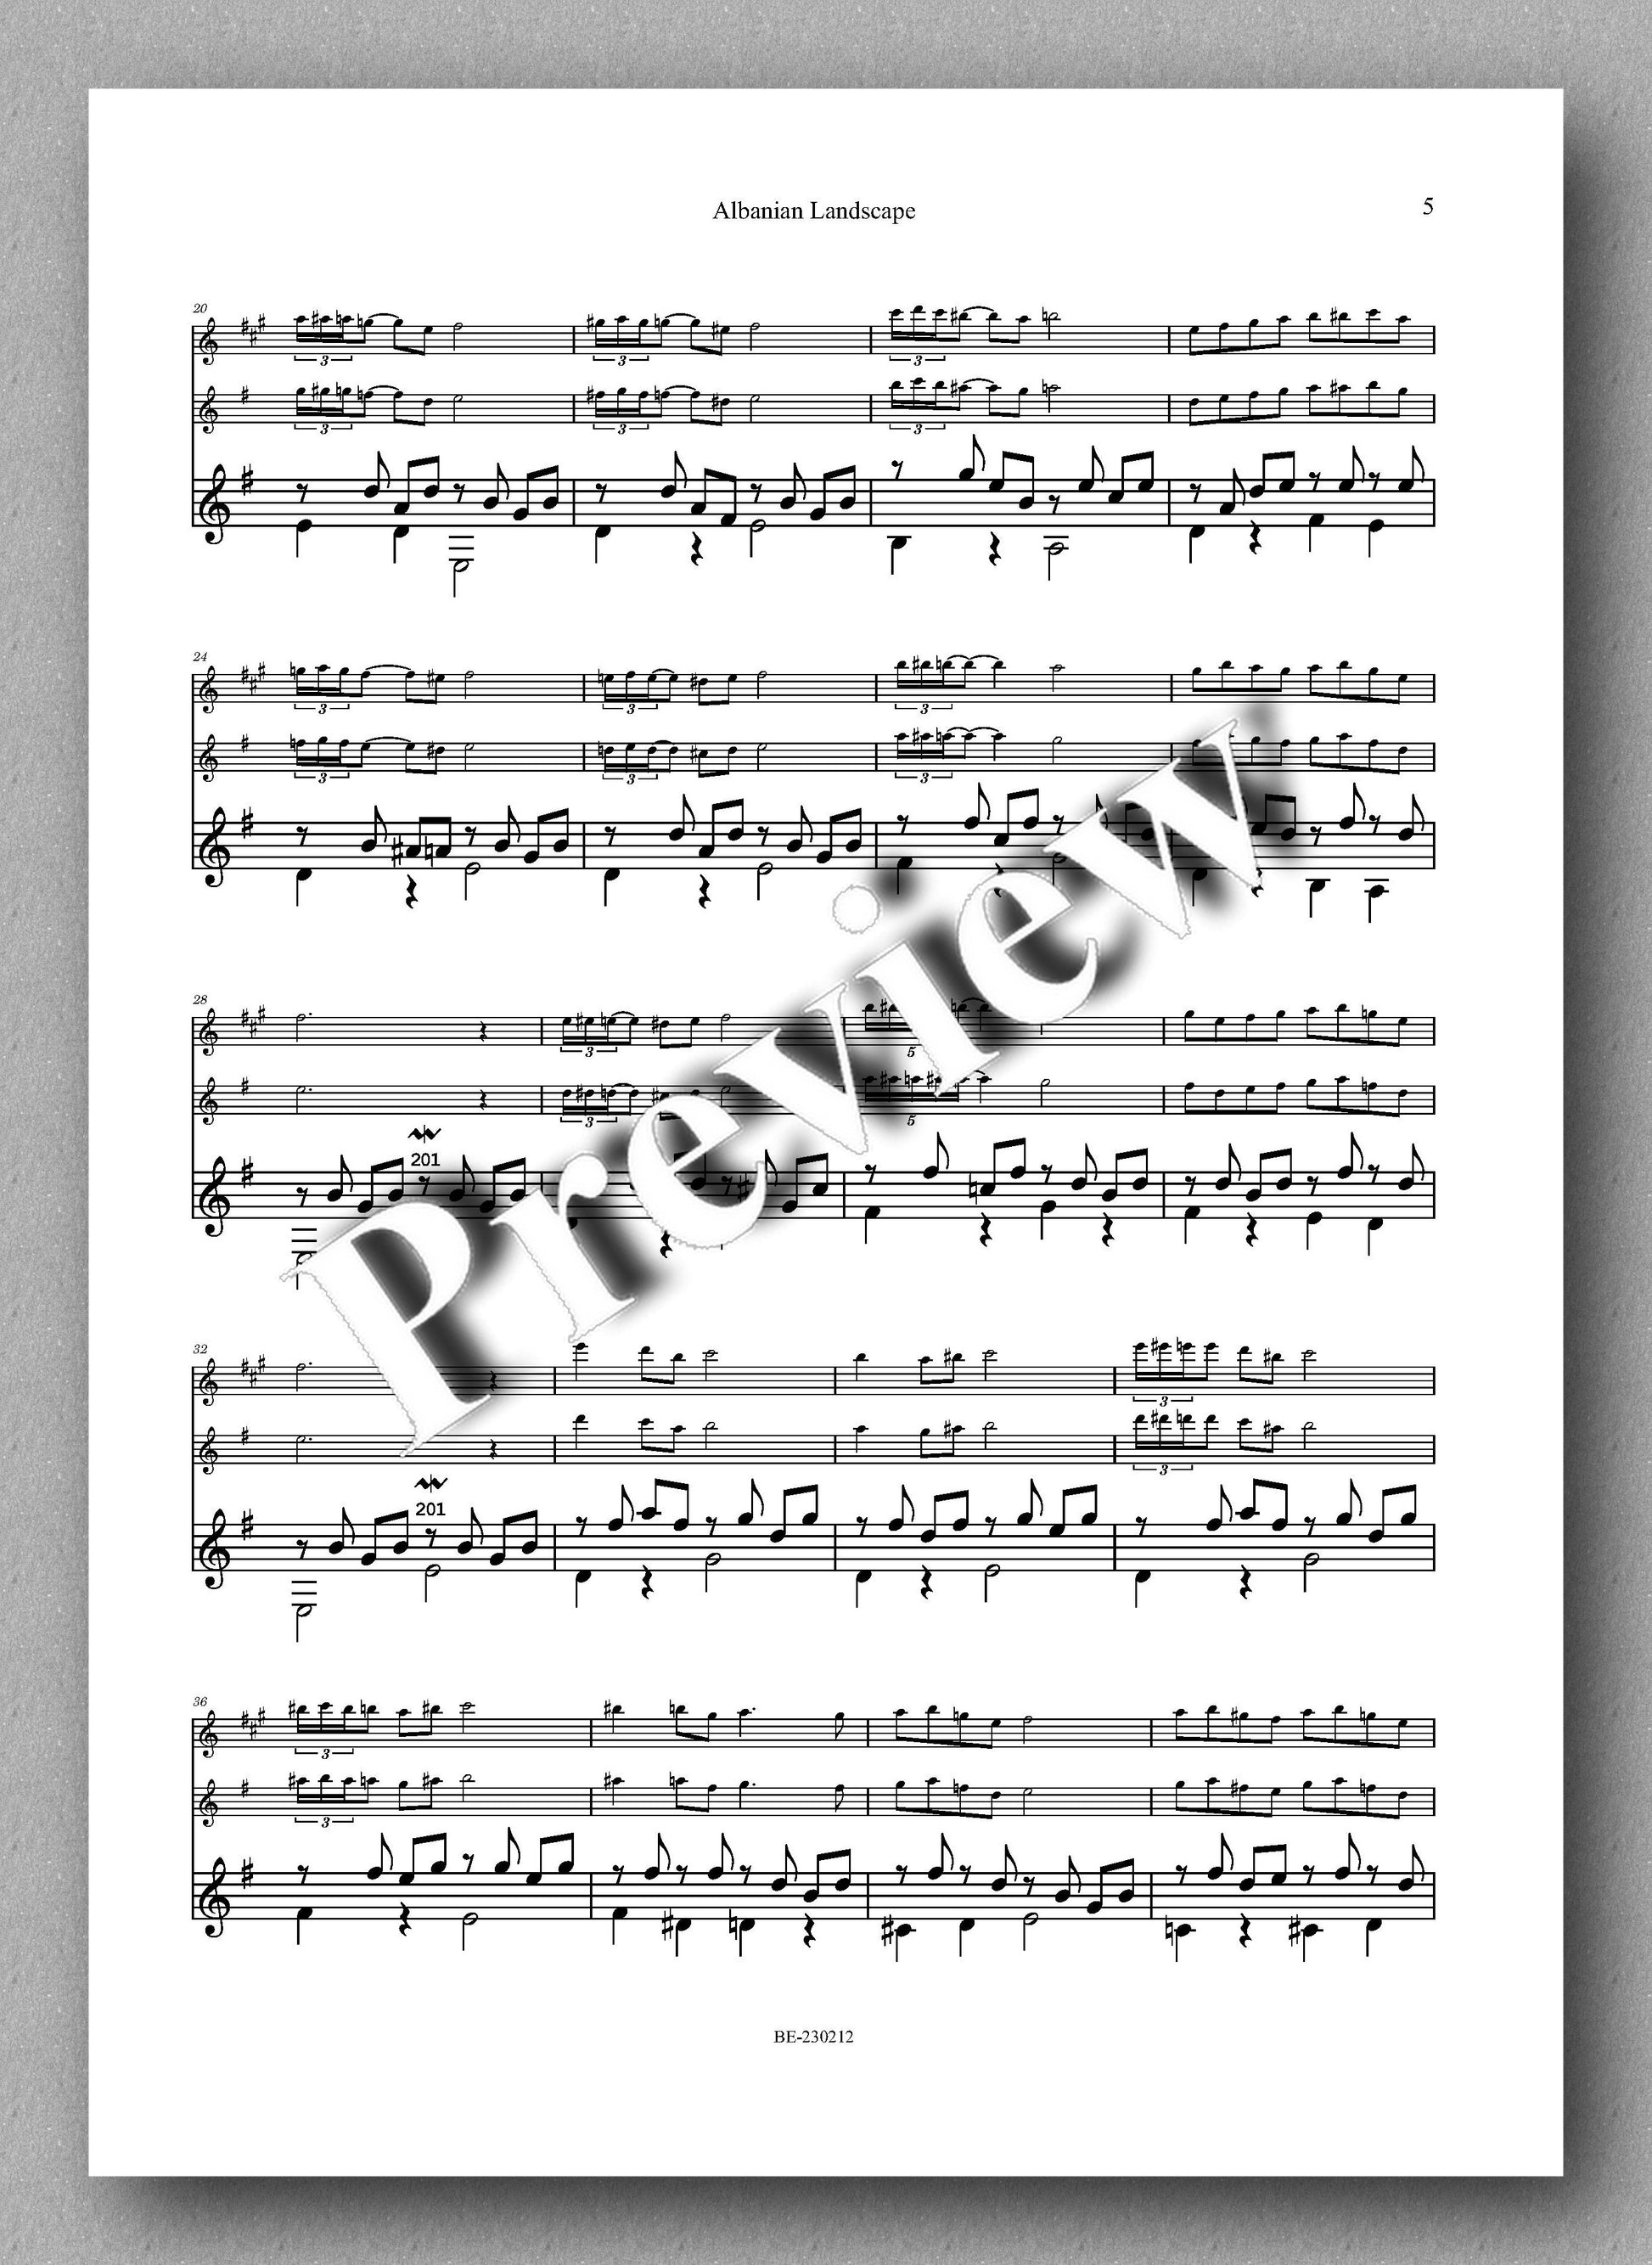 Albanian Landscape by Redi Marku - preview of the music score 2